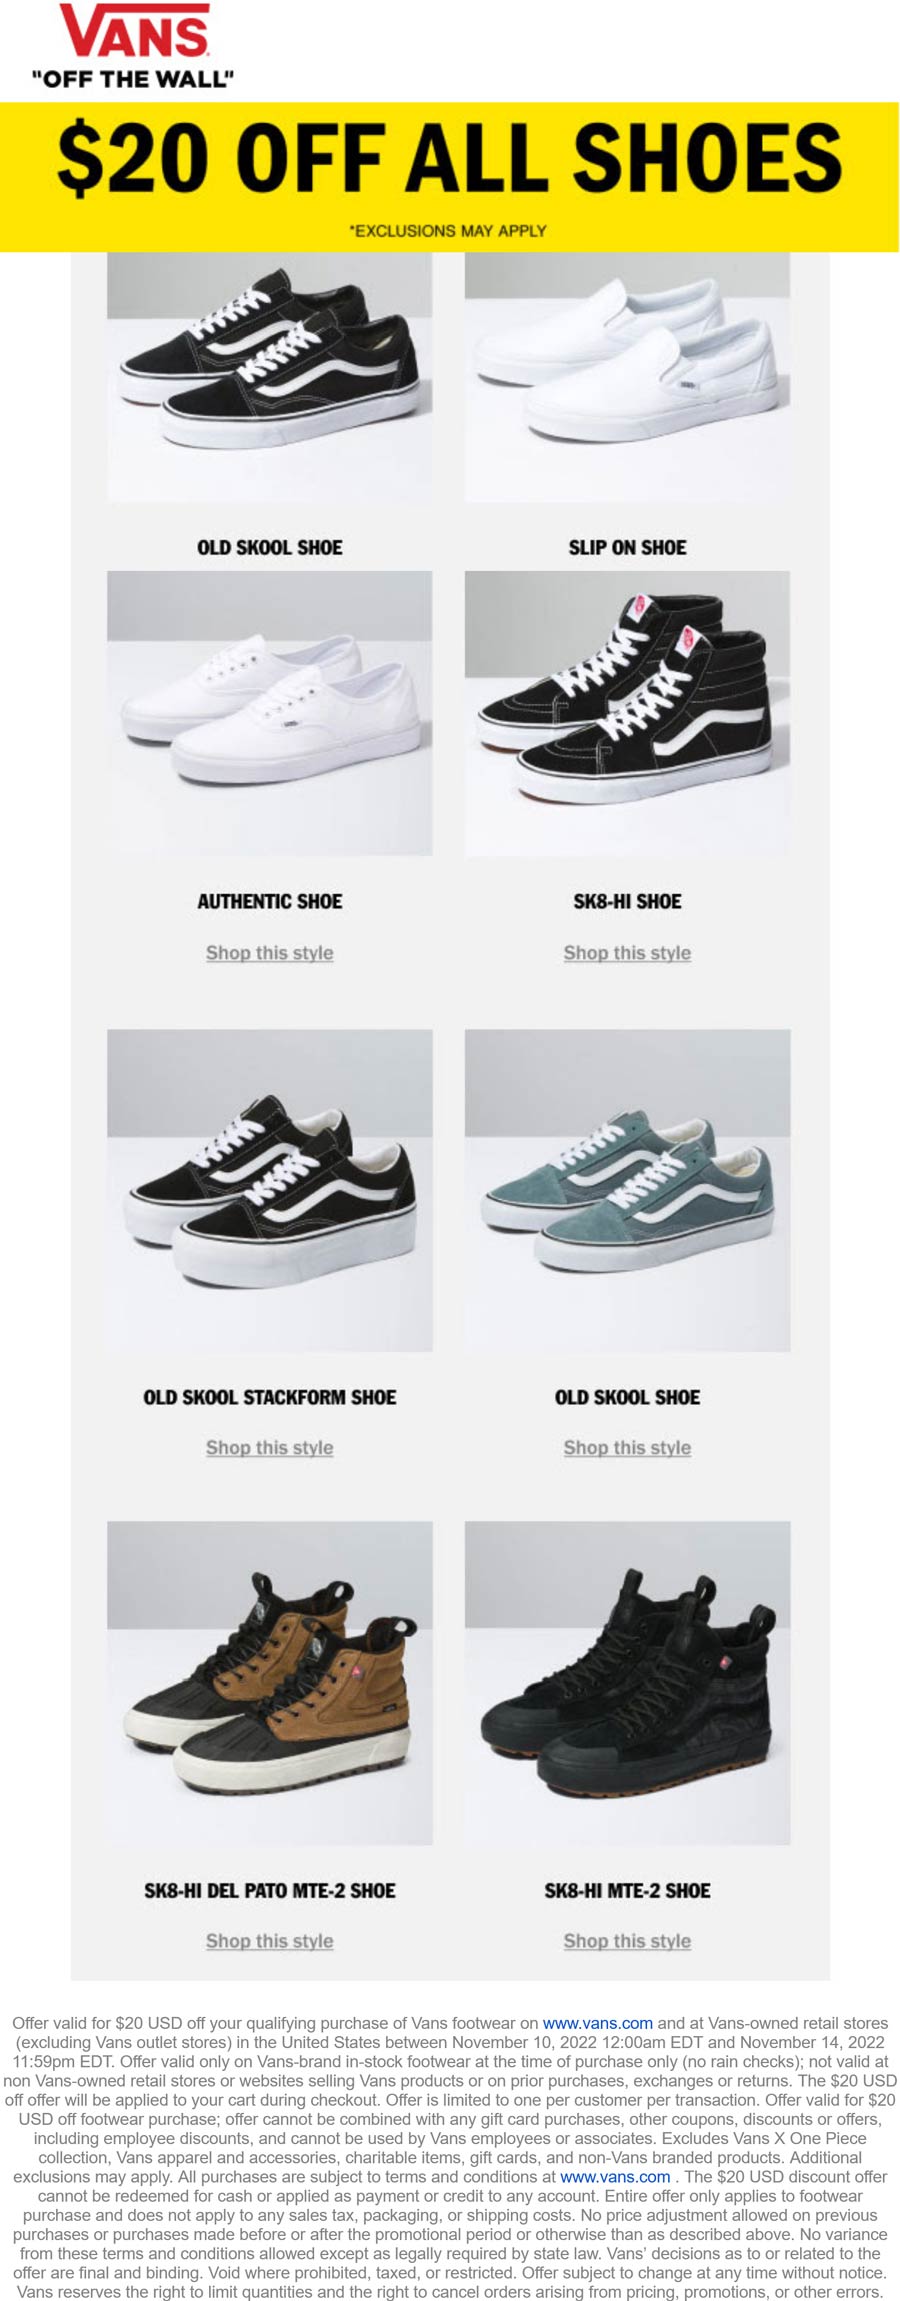 Vans stores Coupon  $20 off all shoes at Vans, ditto online #vans 